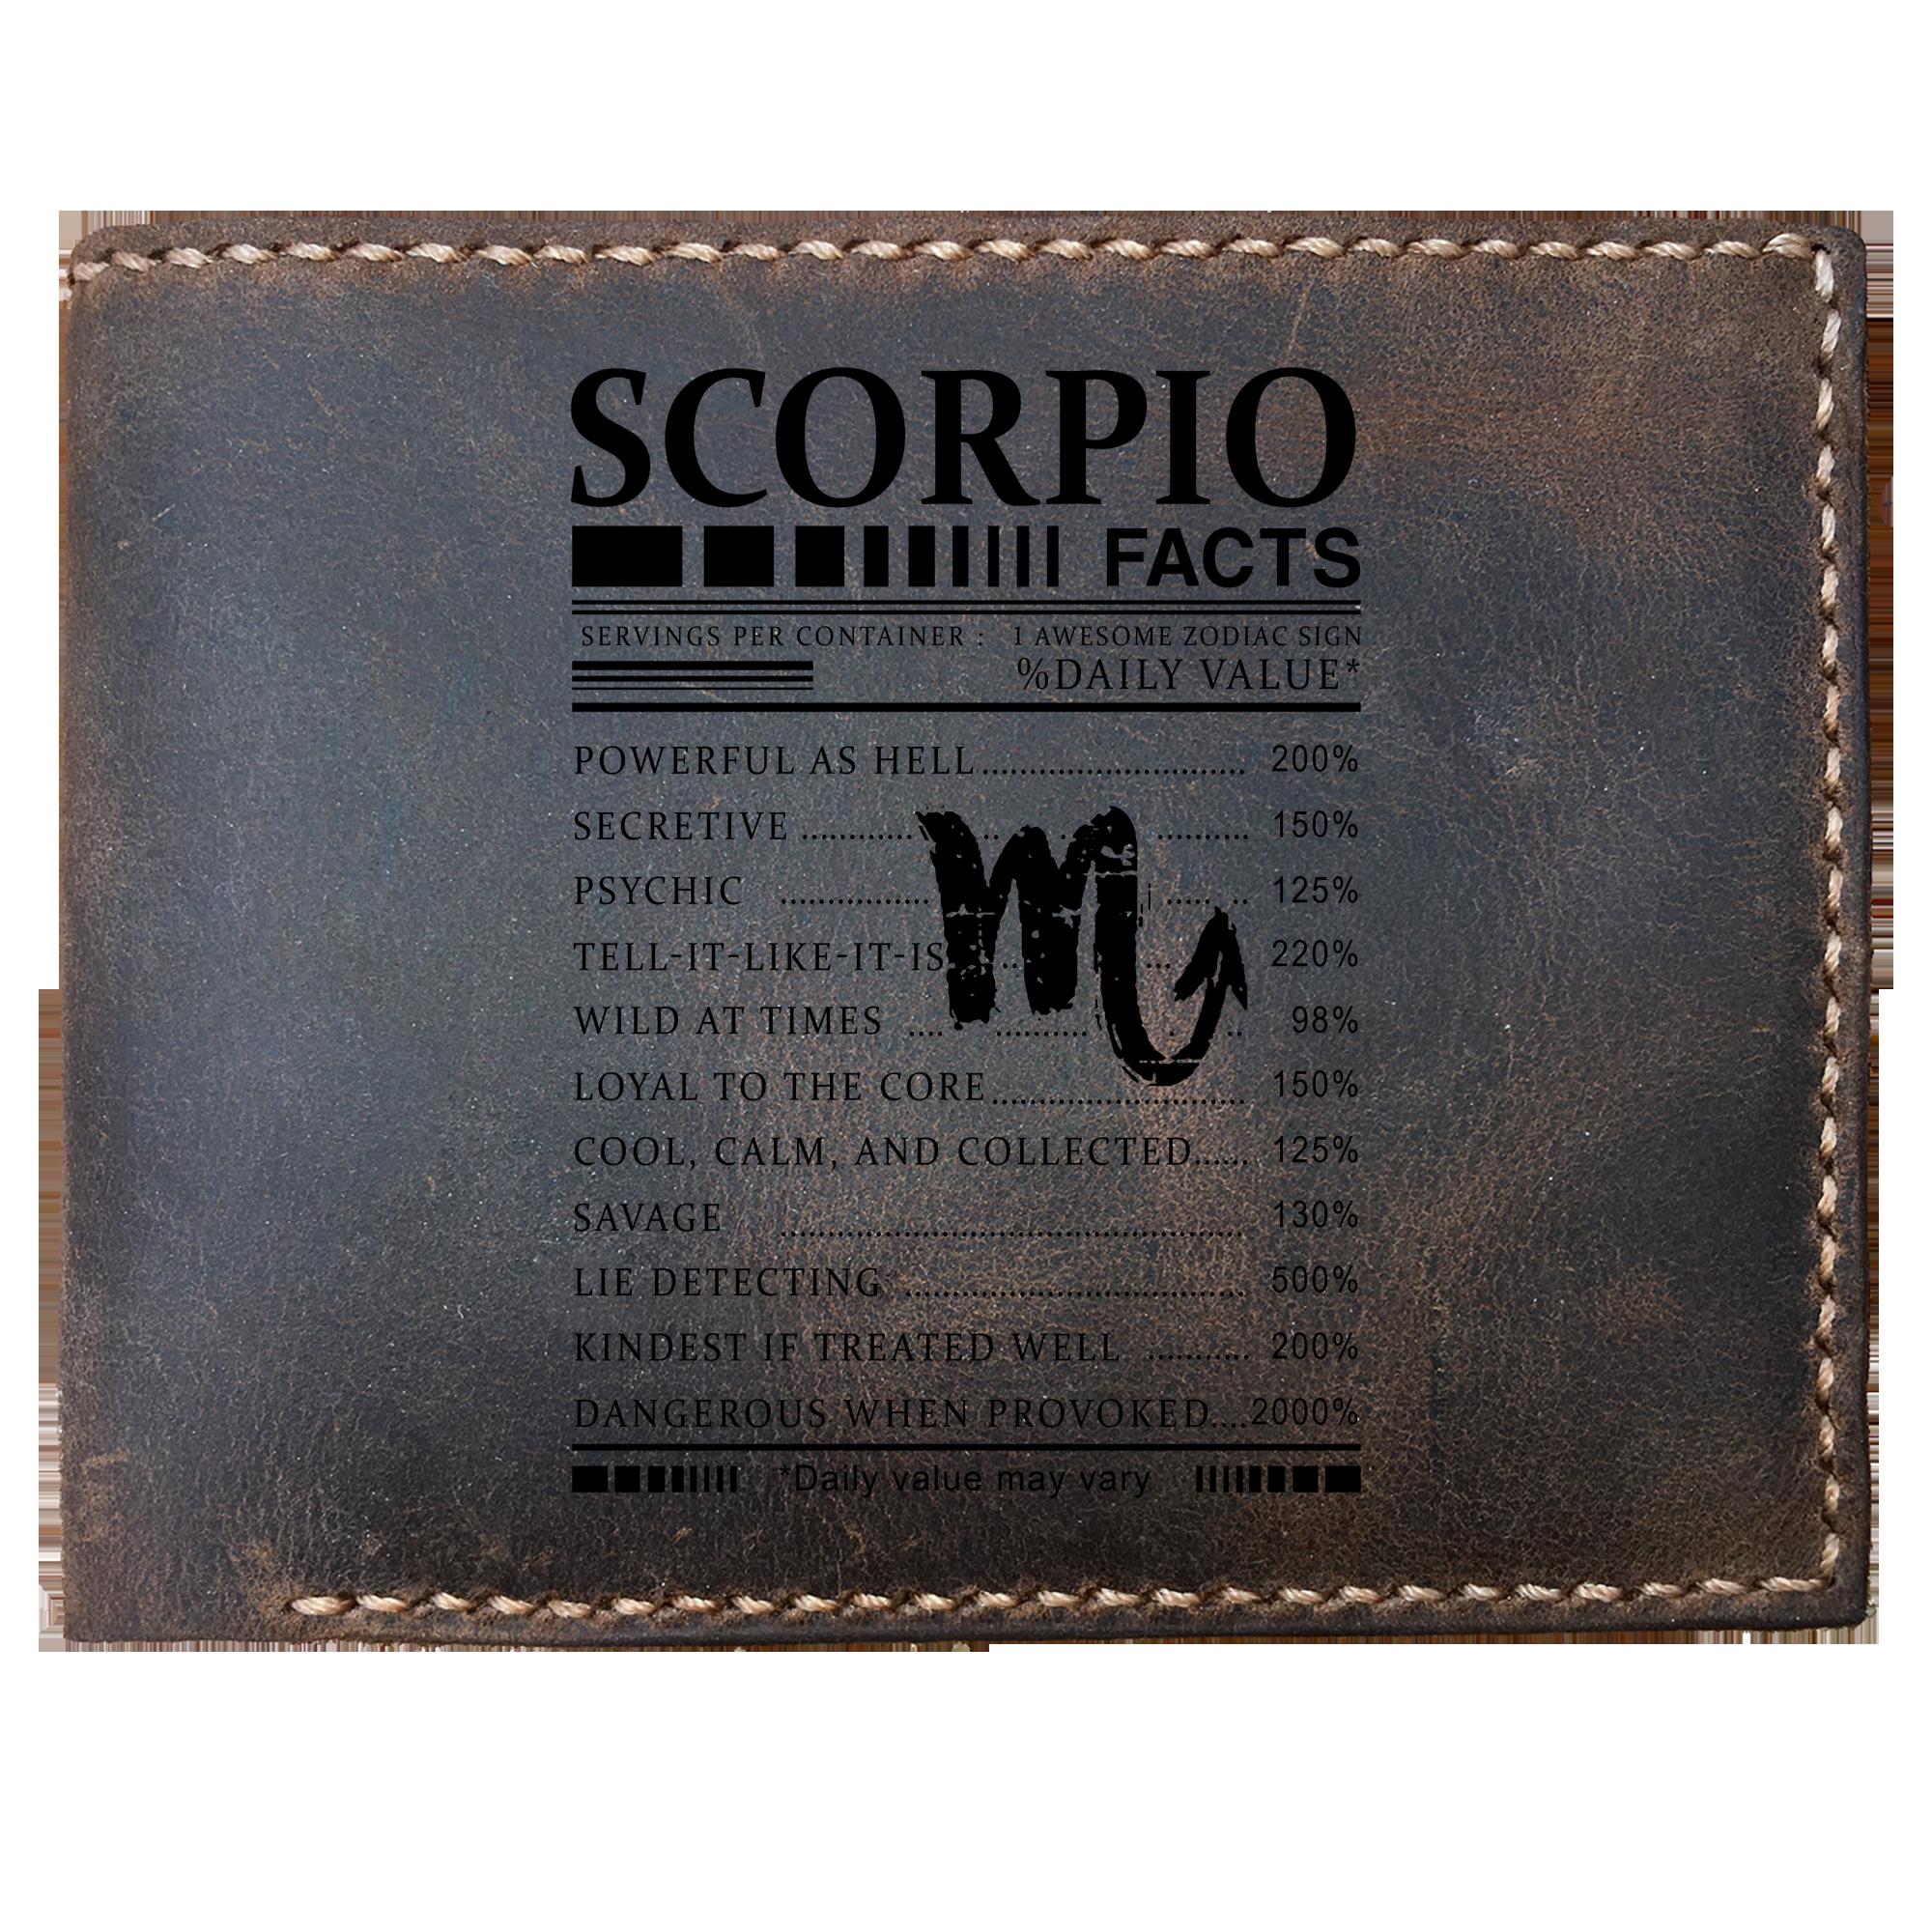 Skitongifts Funny Custom Laser Engraved Bifold Leather Wallet For Men, Scorpio Facts Zodiac Sign